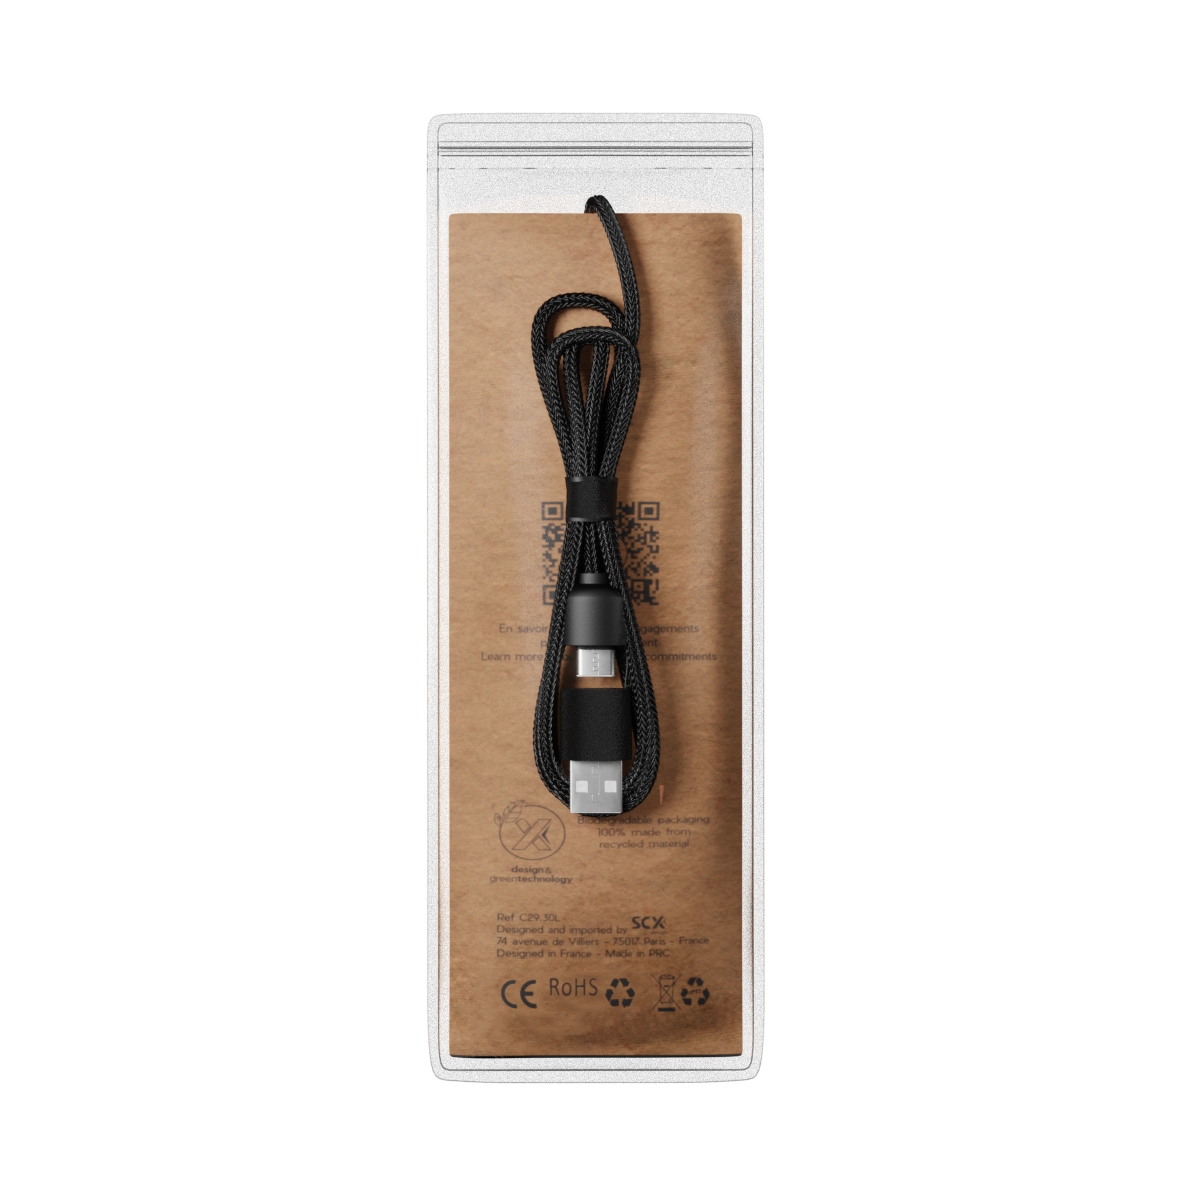 C38 - Extended eco cable 5-in-1